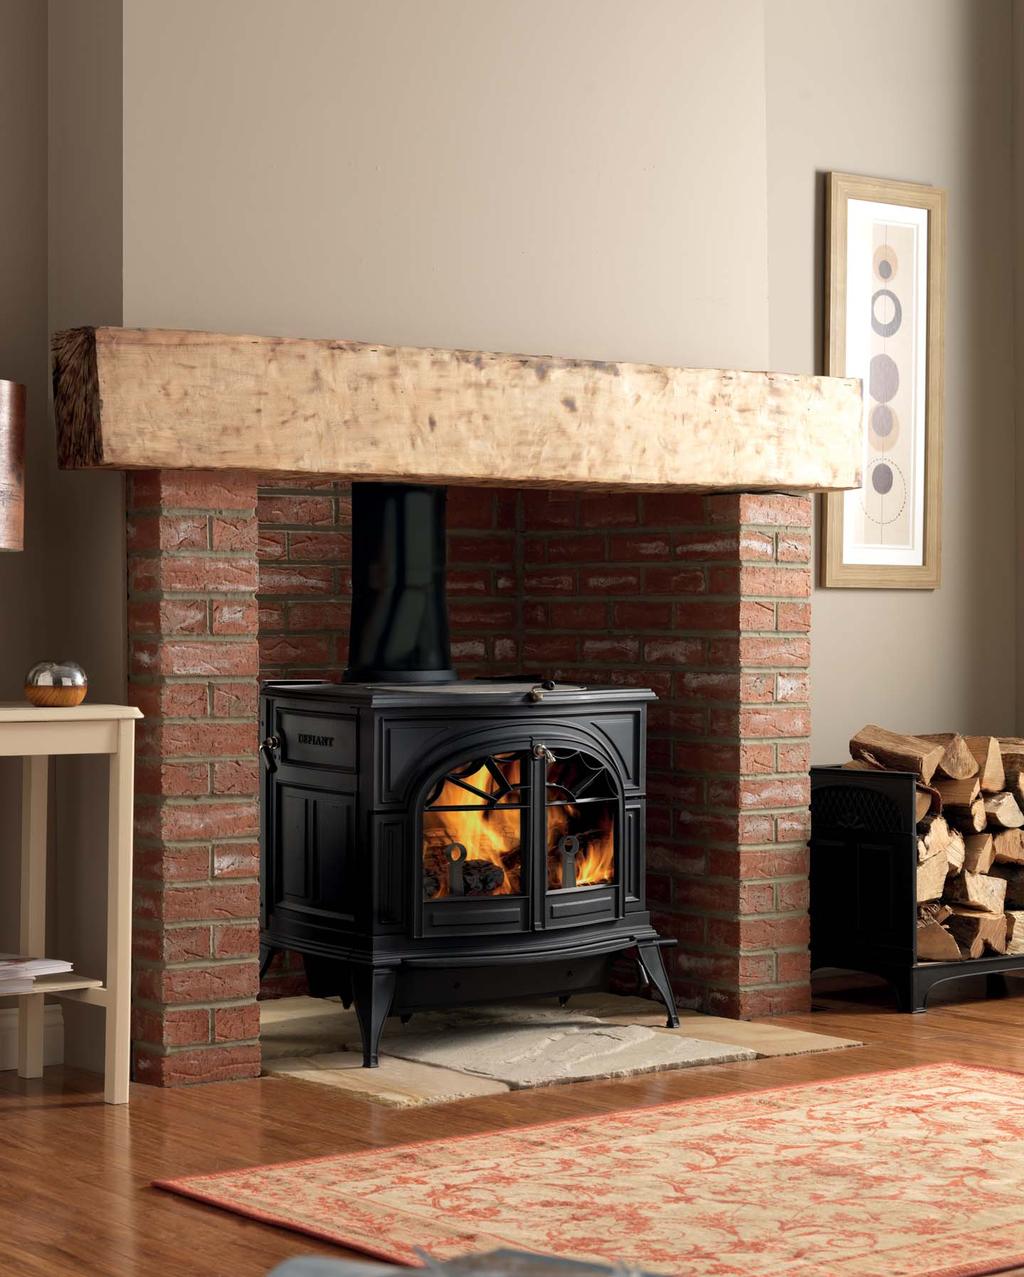 18 www.acrheatproducts.co.uk 19 TC AW TL CC EA DEFIANT WOODBURNER A real powerhouse of a stove with a massive 9.